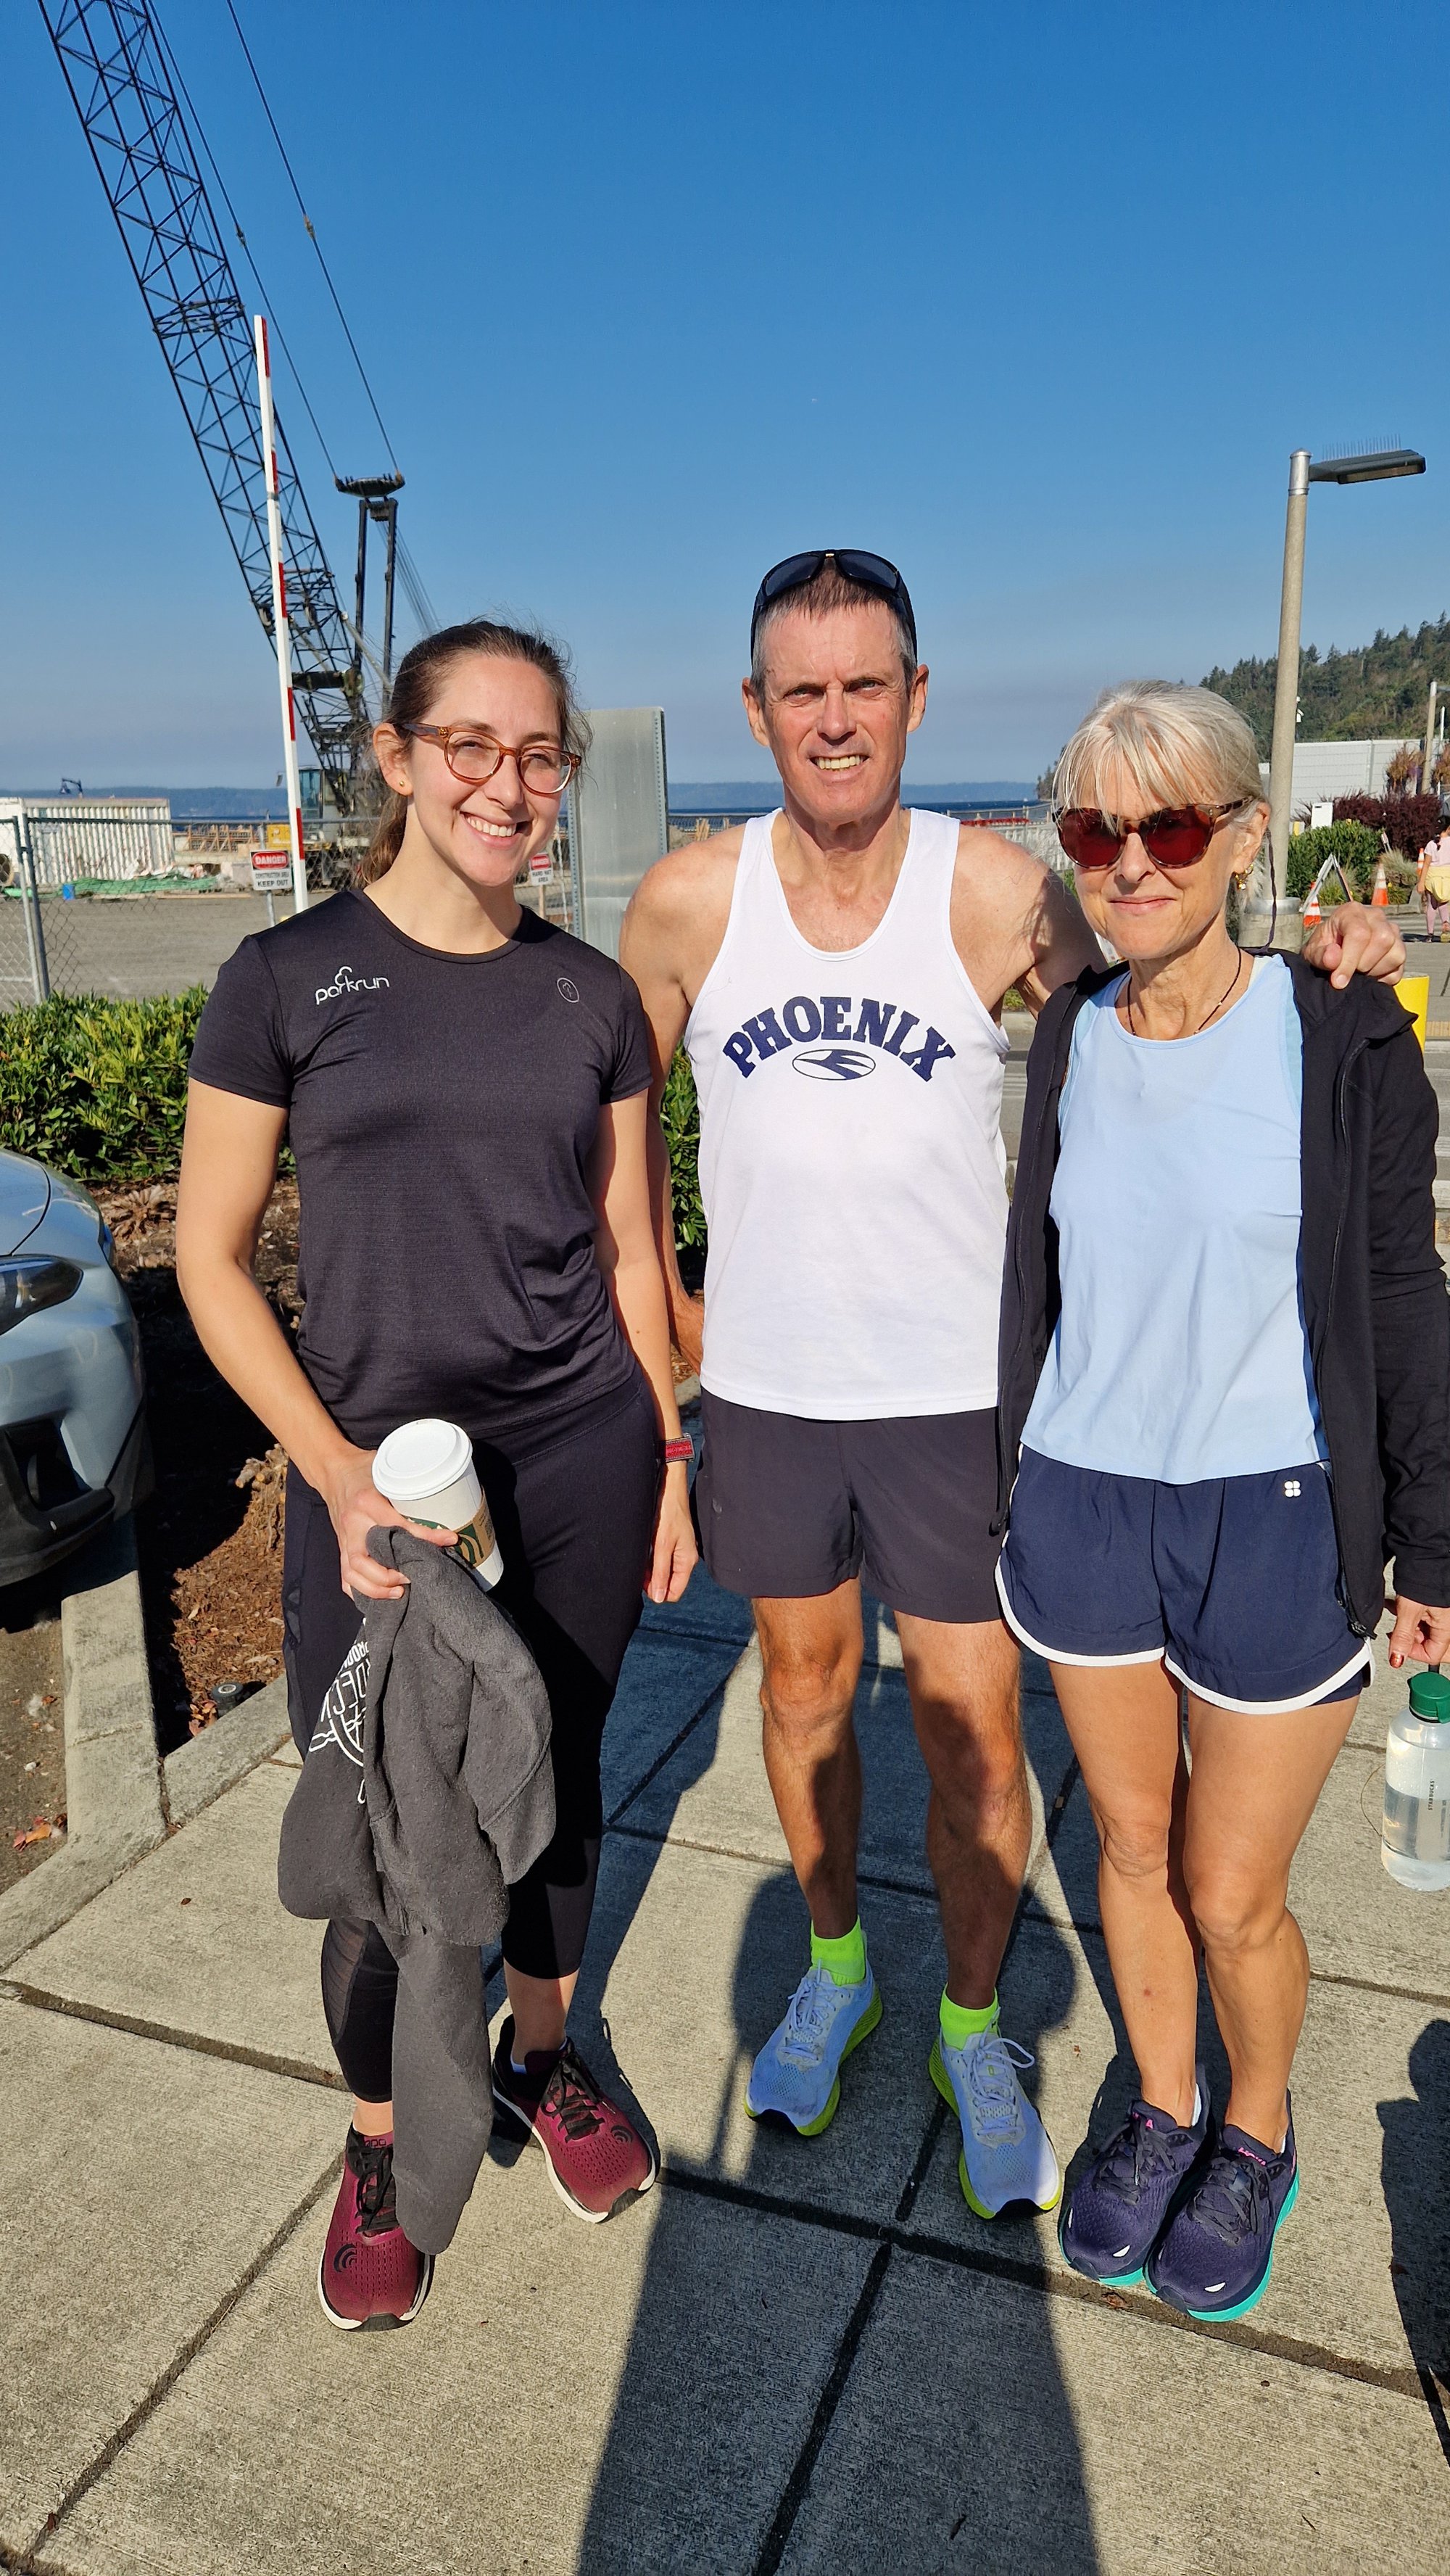 Mike and Emma with race director Dena at Des Moines Creek parkrun